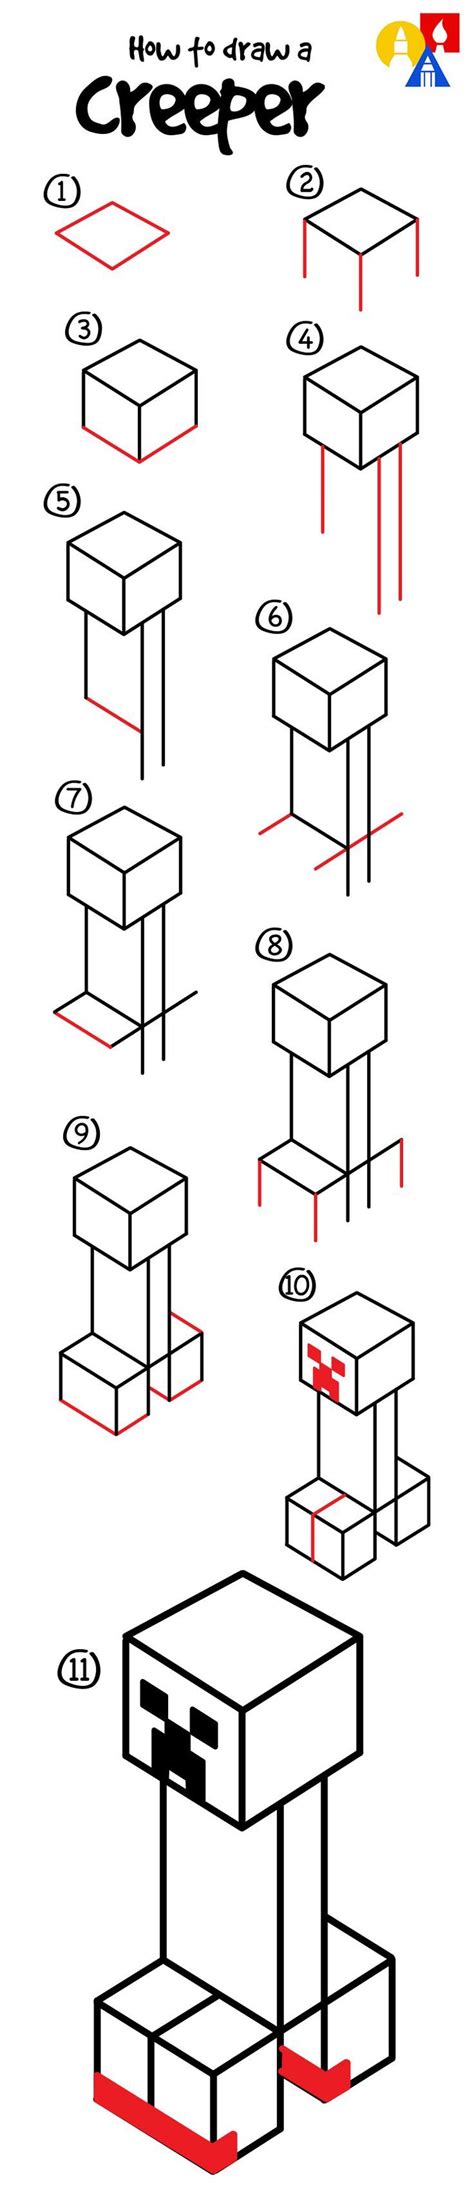 How To Draw A Minecraft Creeper Easy Ruchoculd1971 Decomely